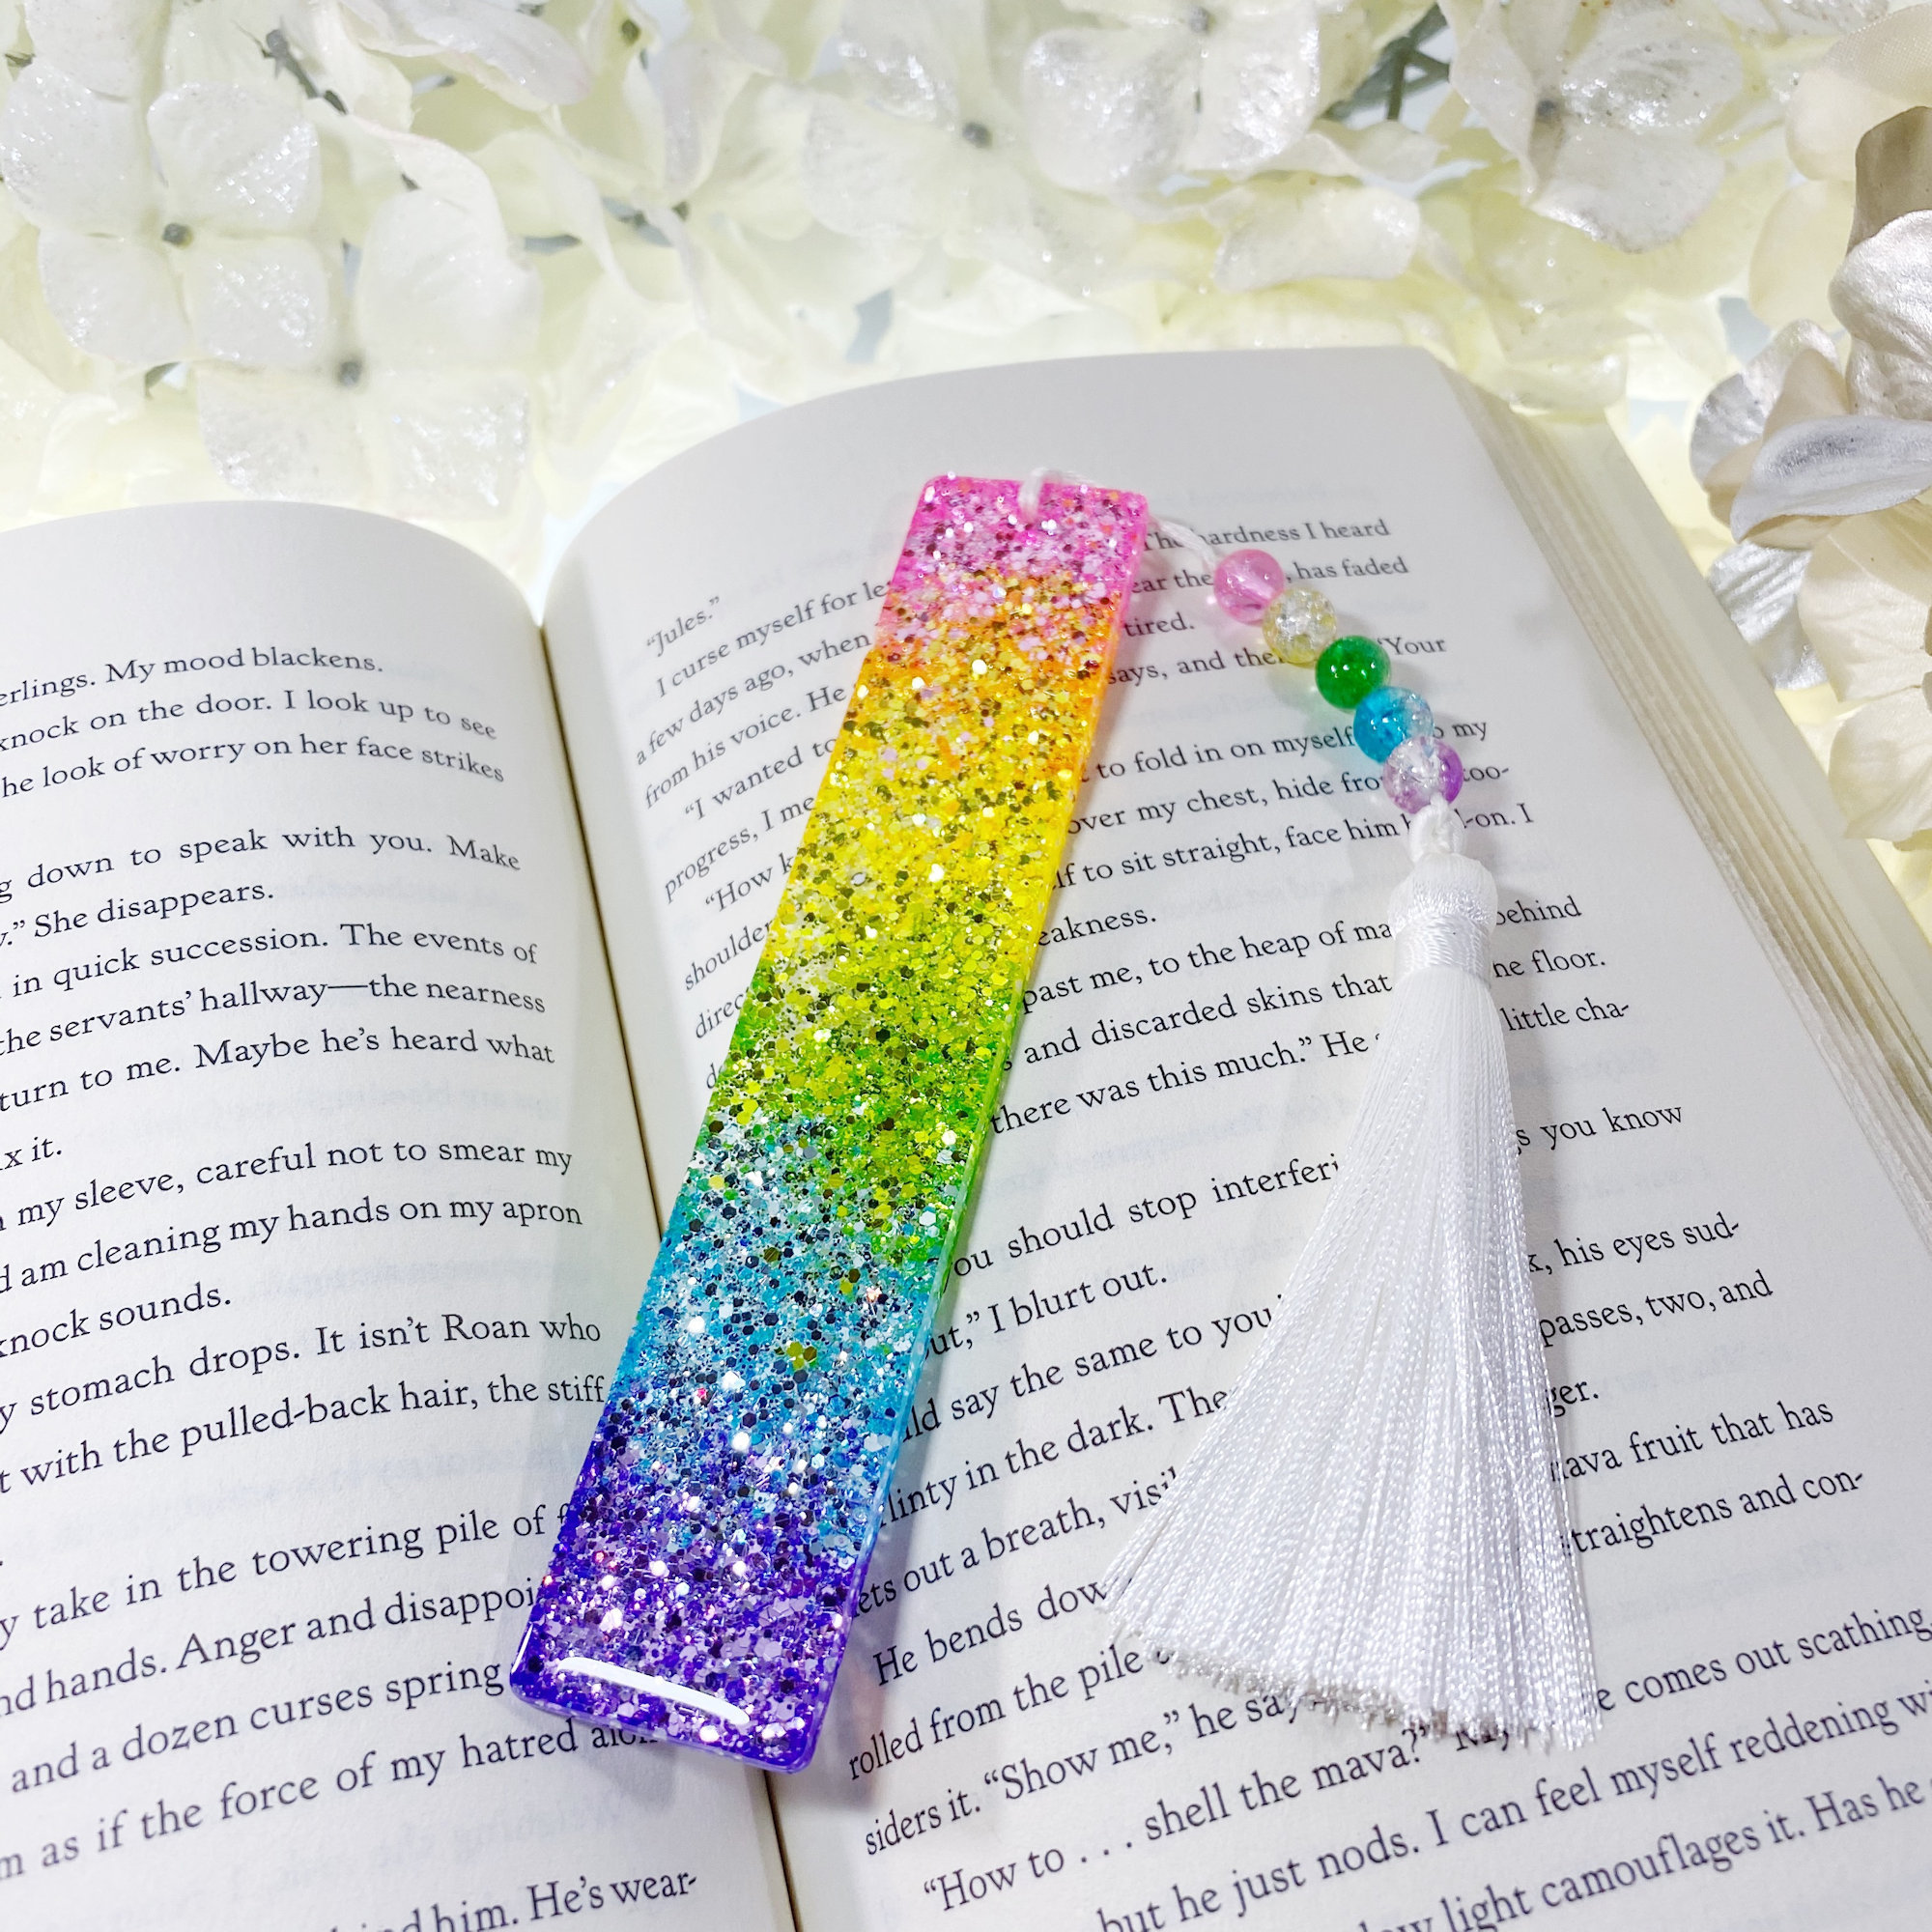 WS Handmade Ribbon Bookmark with Dangling Charms - Soft Pastel